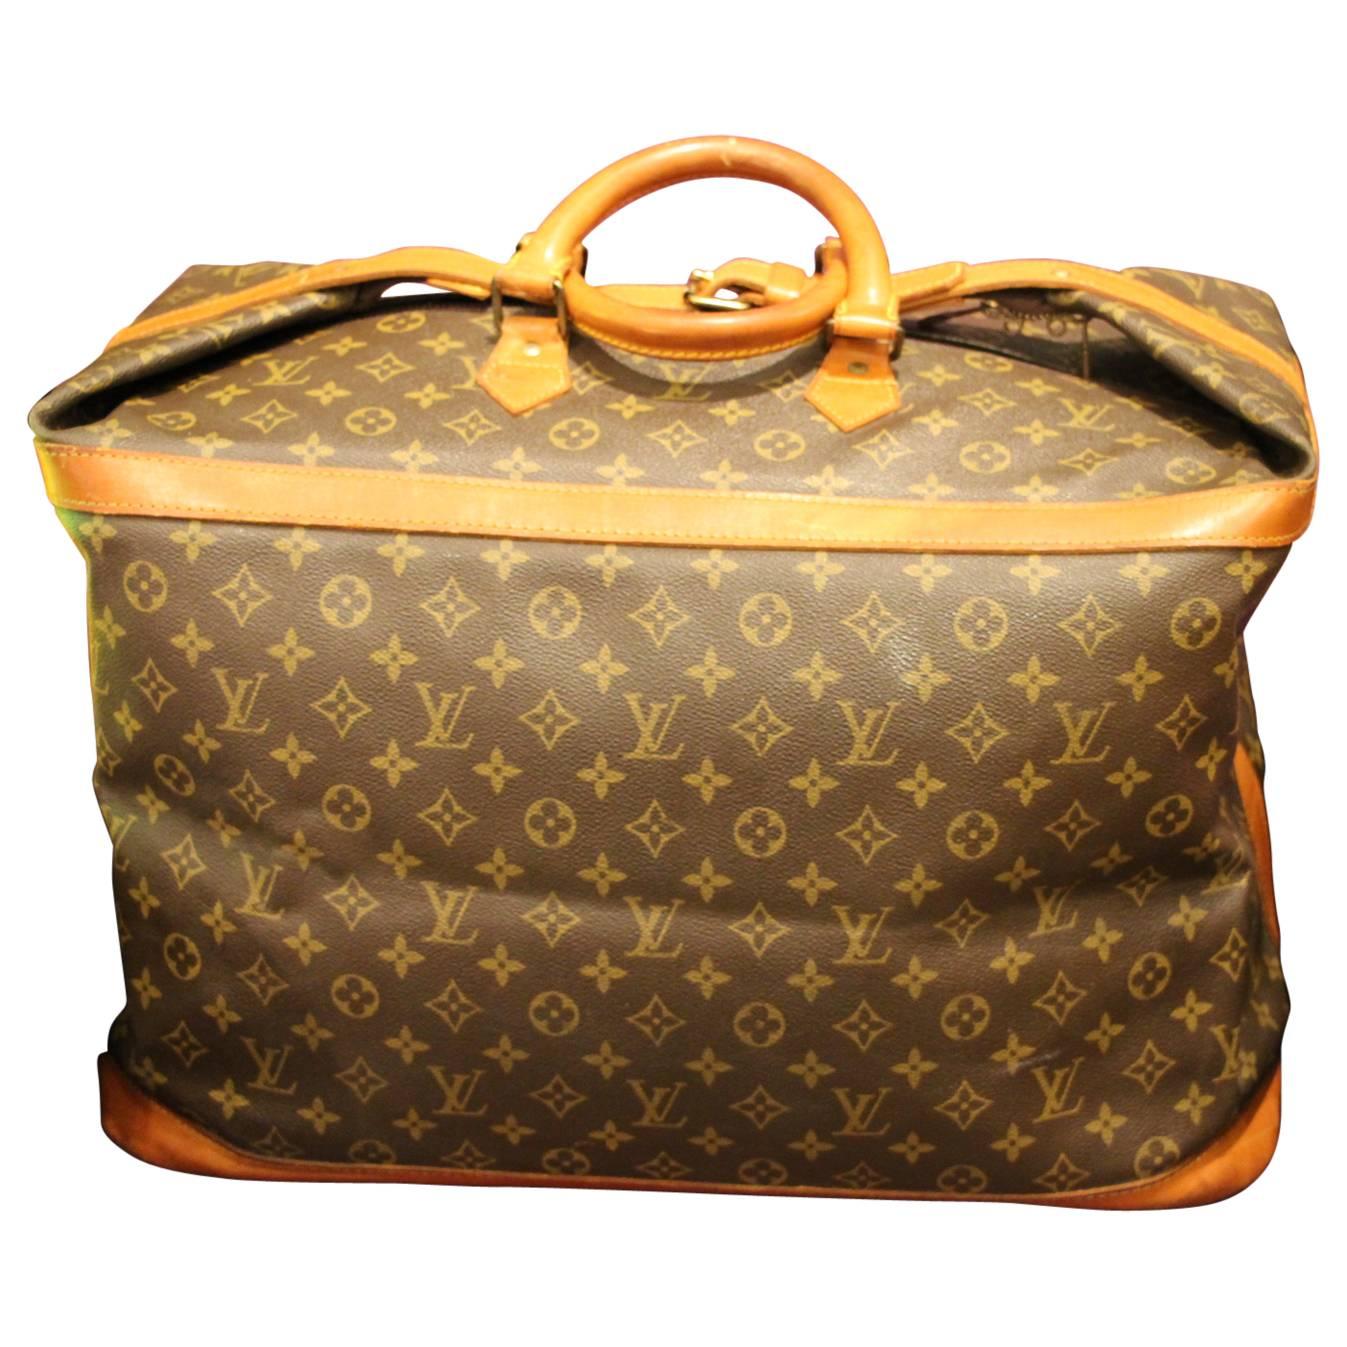 Large Collector's Louis Vuitton Travel Bag 50 in Monogramm Canvas